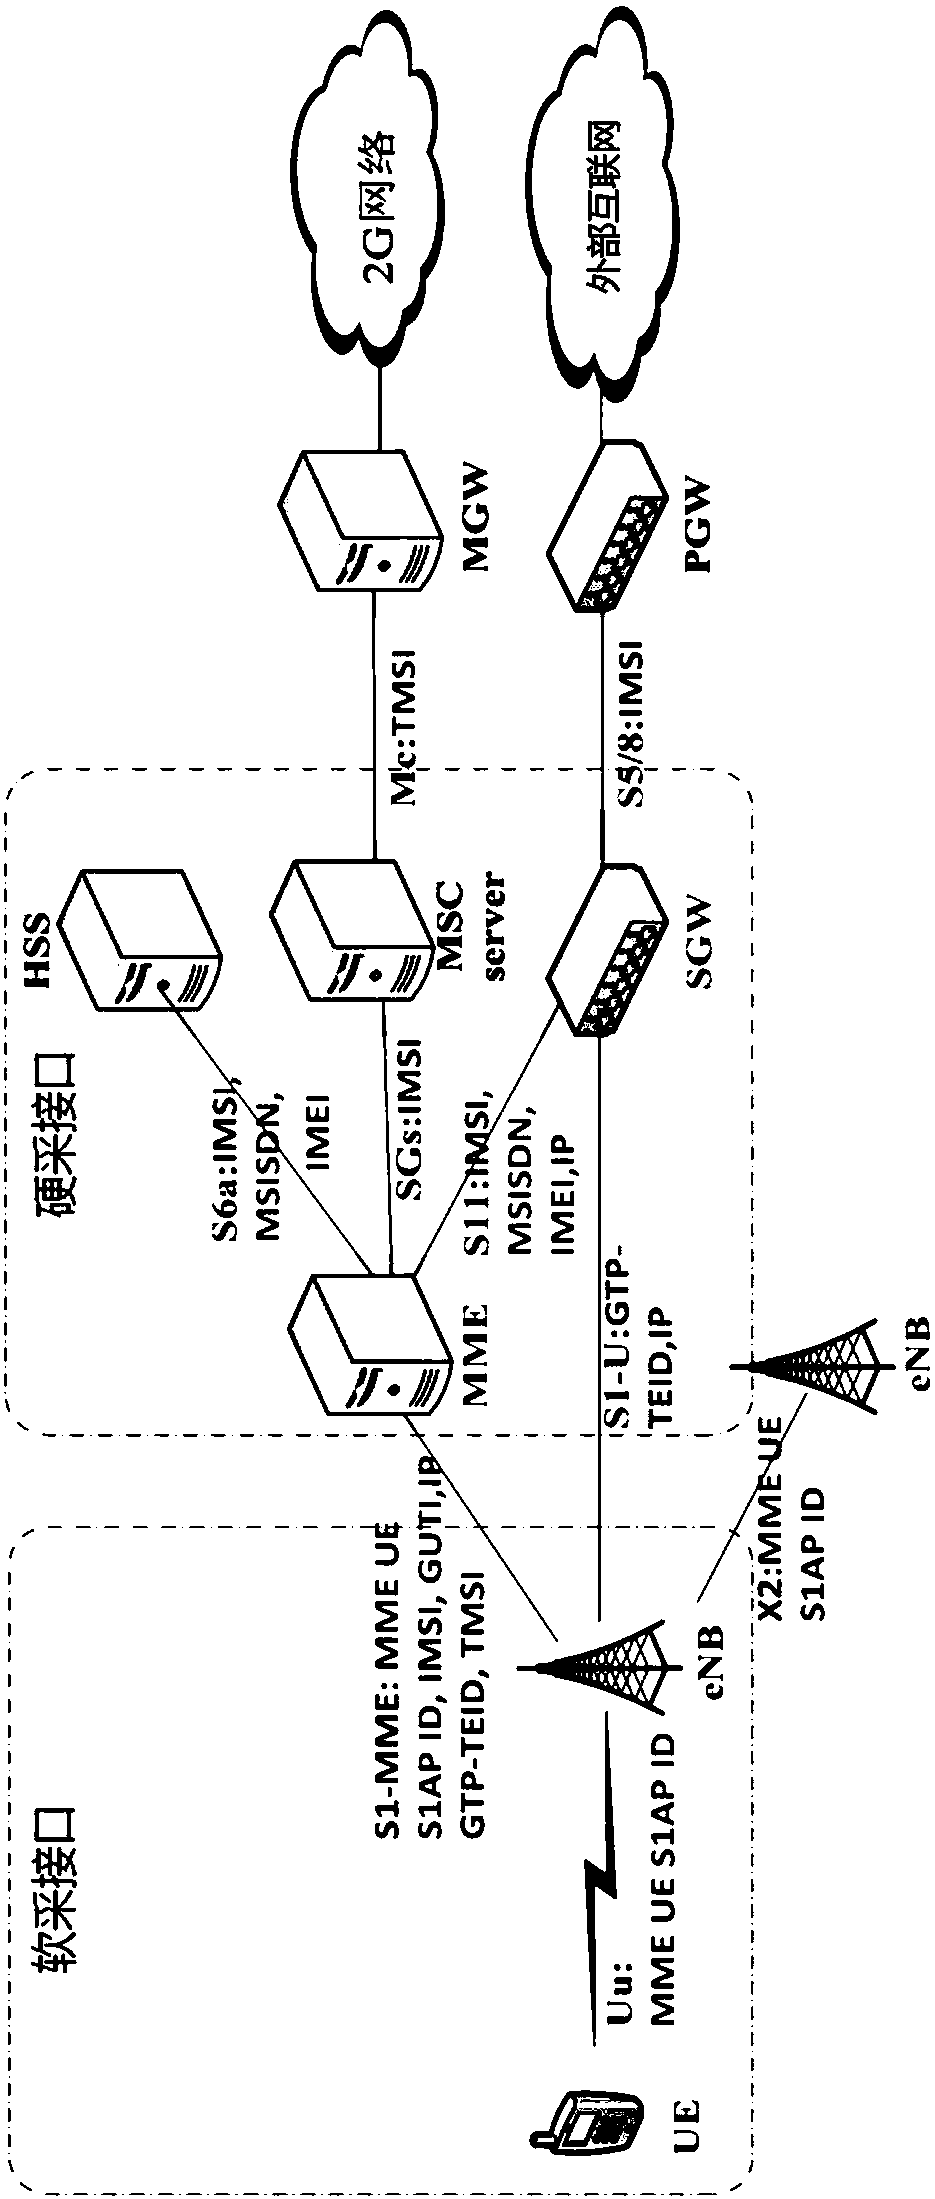 Method and device for signaling association analysis based on hardware and software acquisition